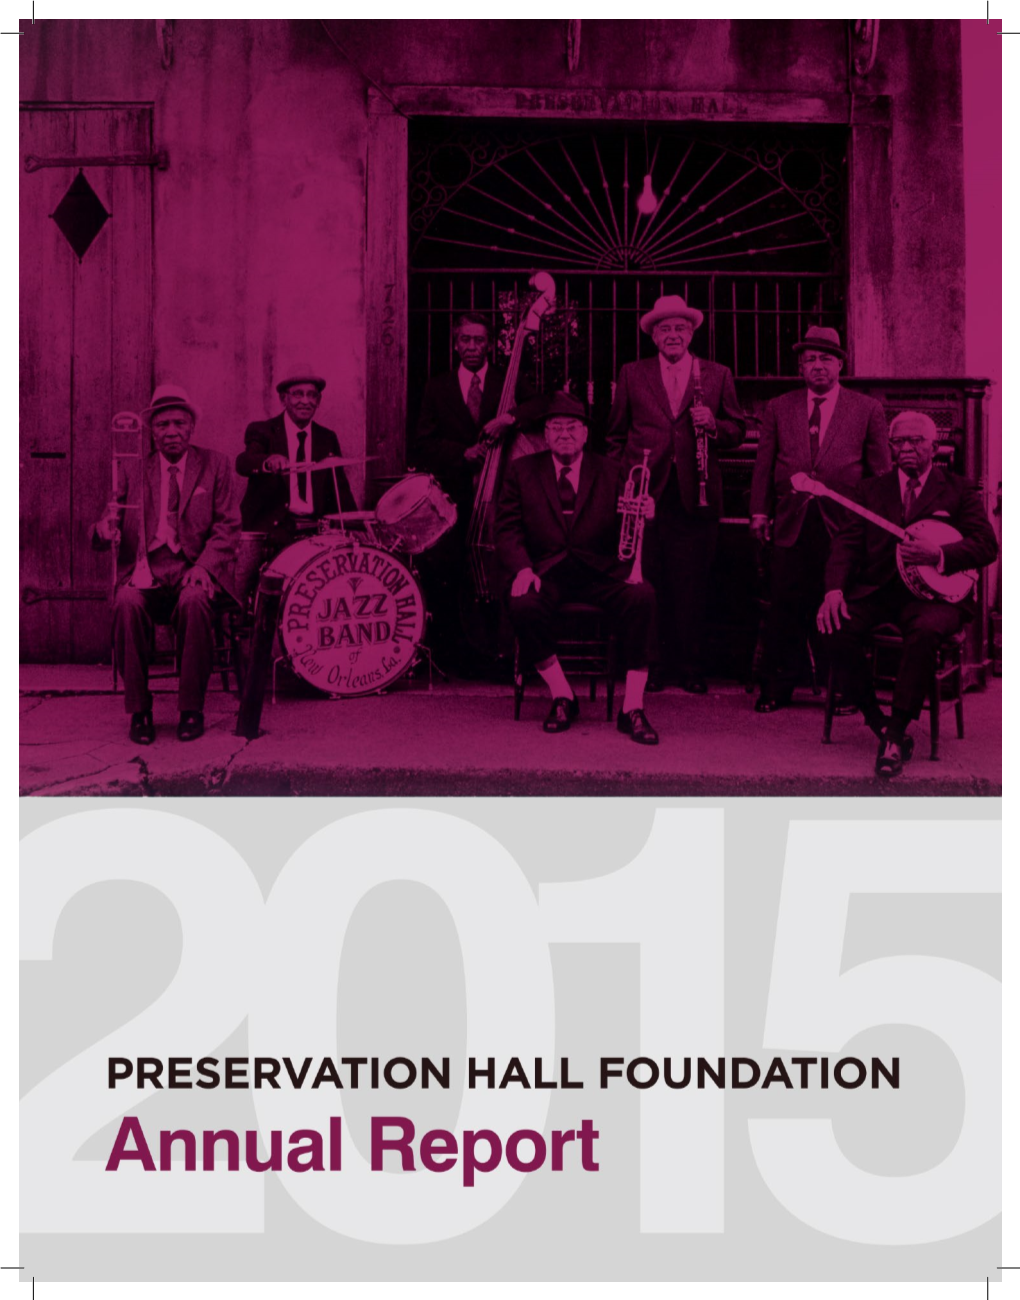 2015 Annual Report for the Preservation Hall Foundation